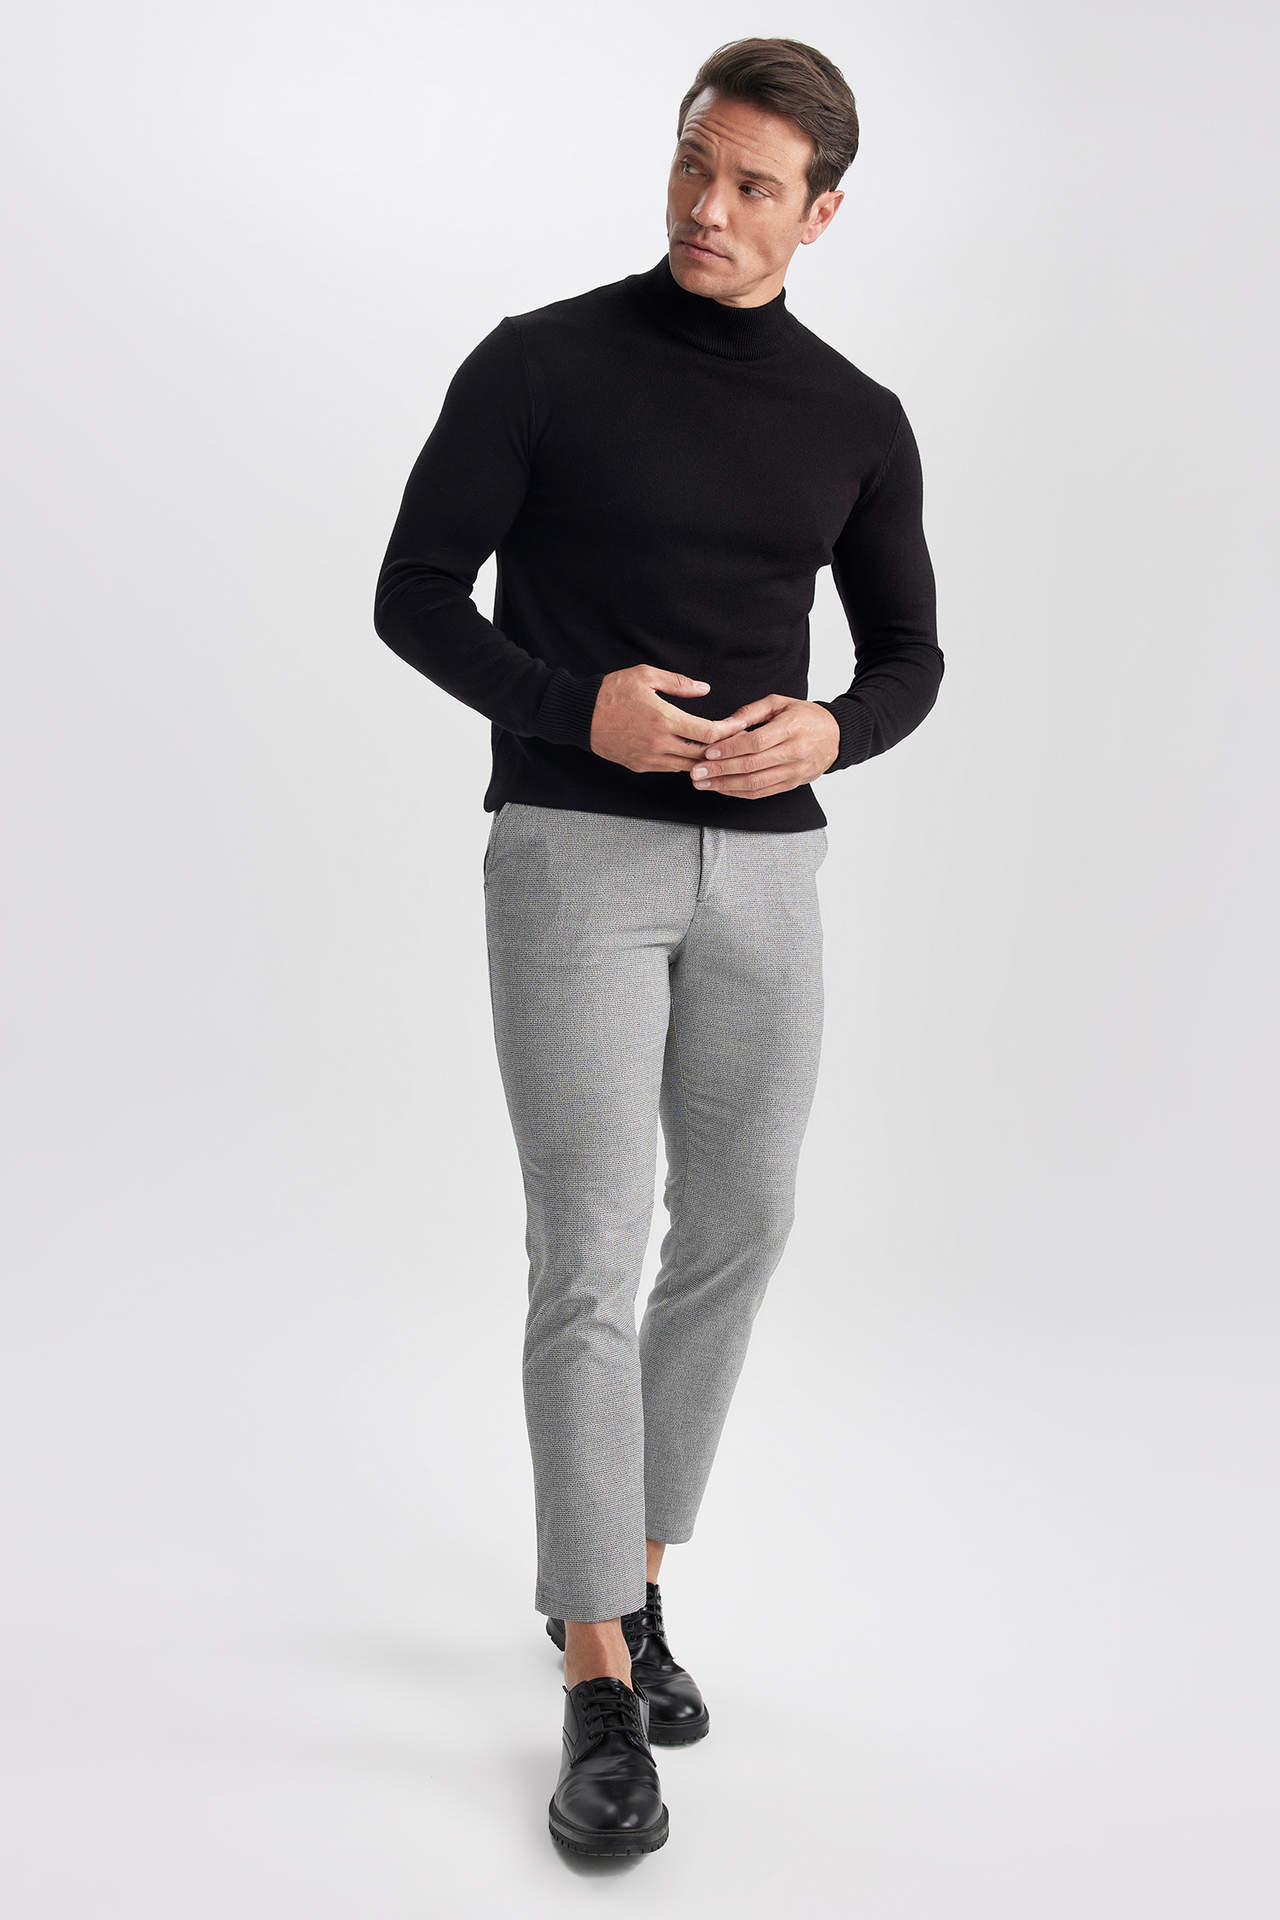 DEFACTO Tailored Regular Fit Trousers